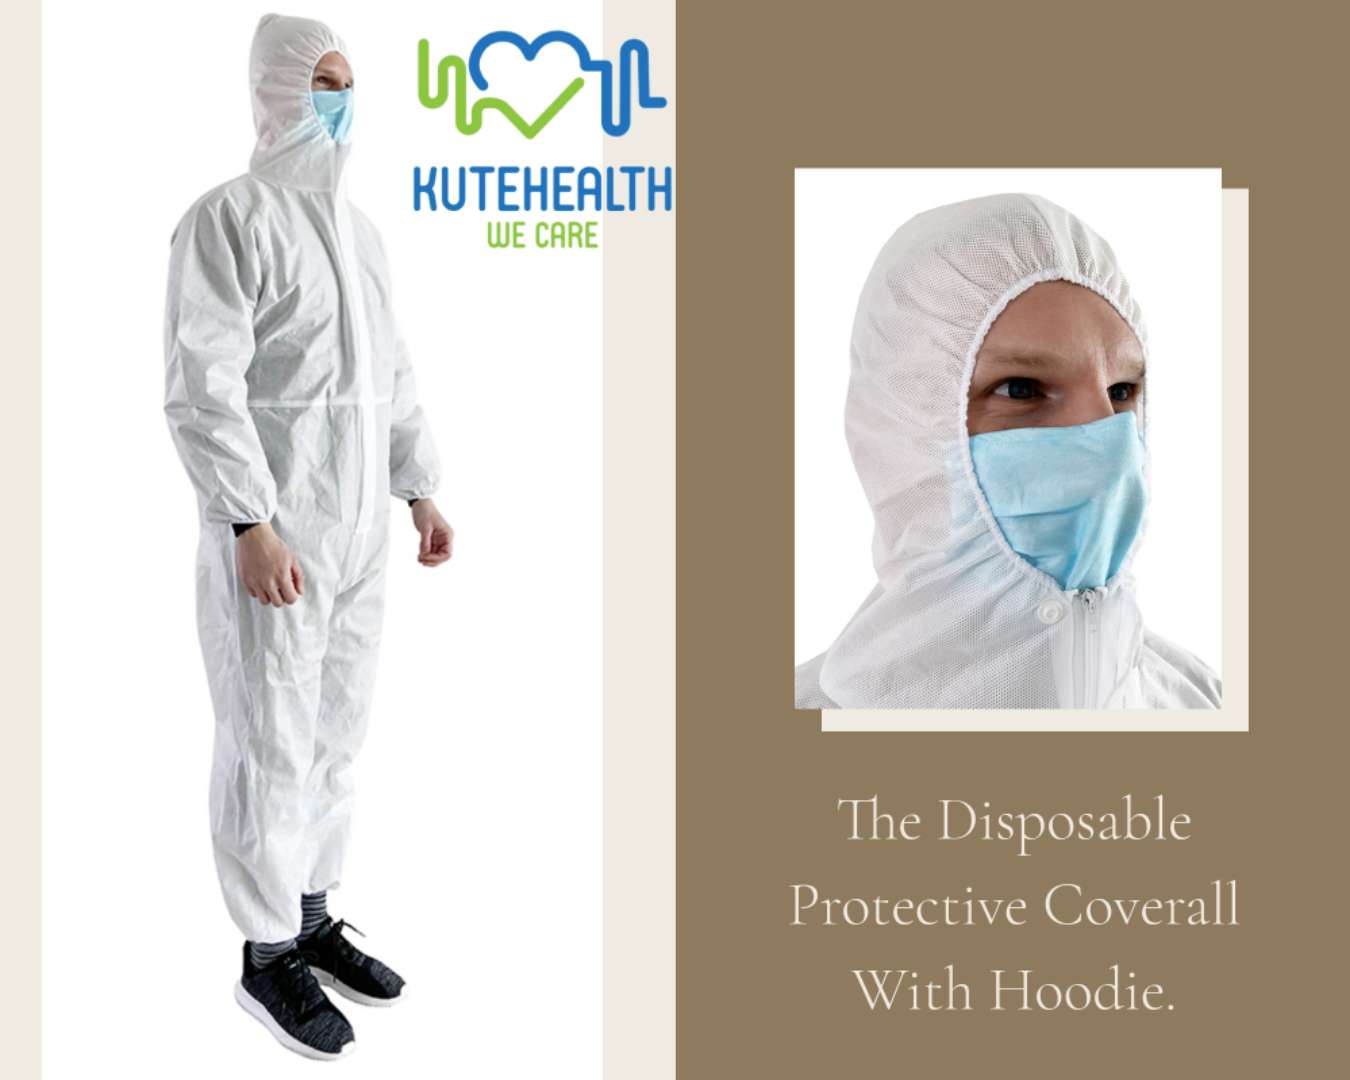 All About PPE suits or Protective Coveralls.